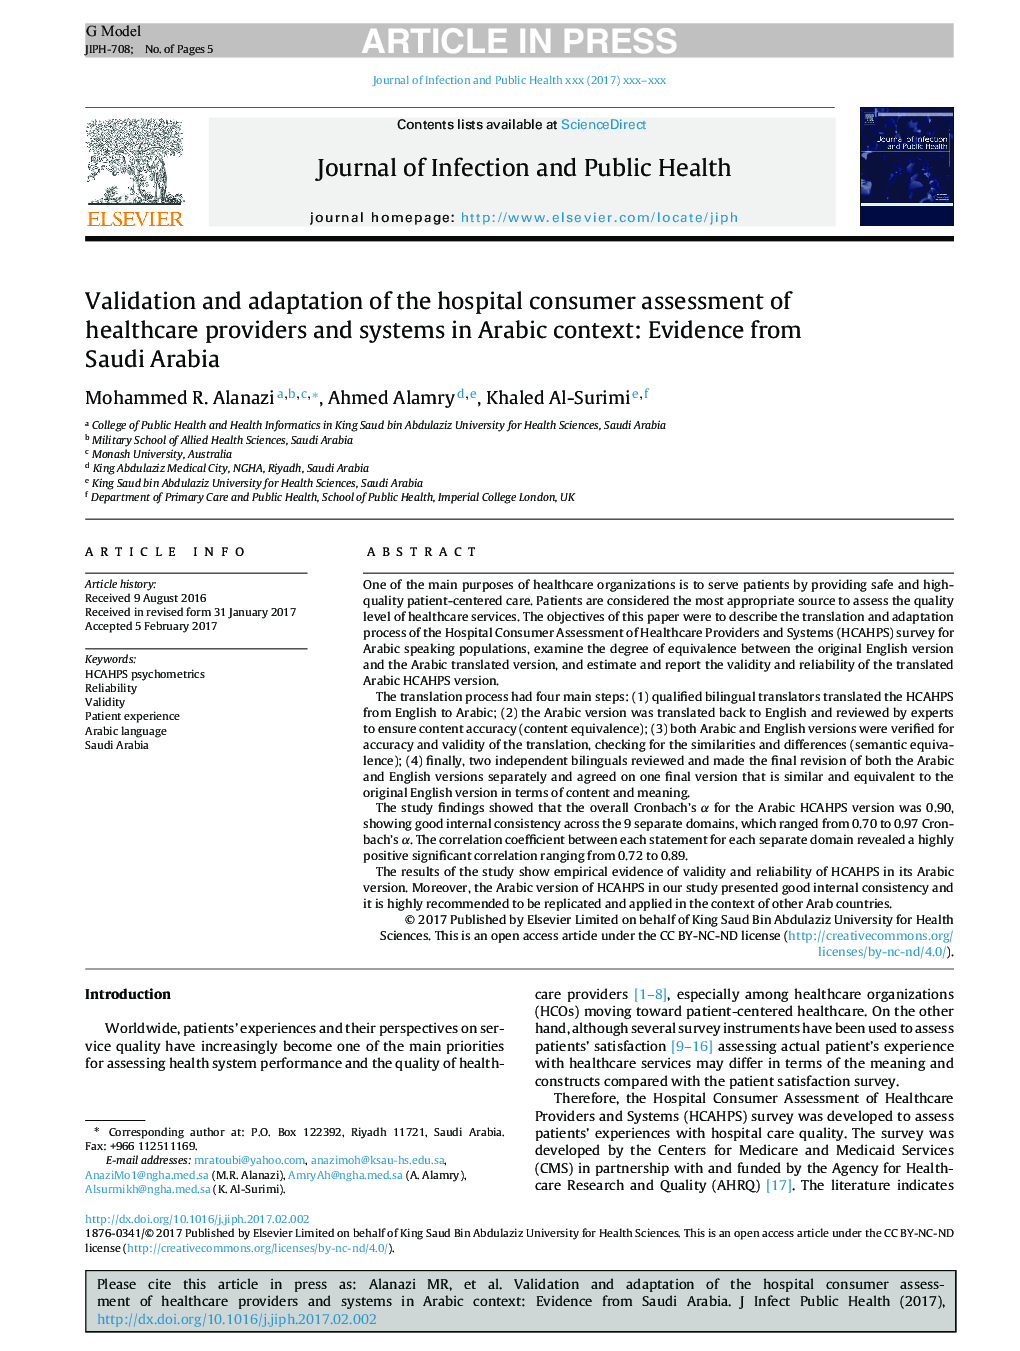 Validation and adaptation of the hospital consumer assessment of healthcare providers and systems in Arabic context: Evidence from Saudi Arabia